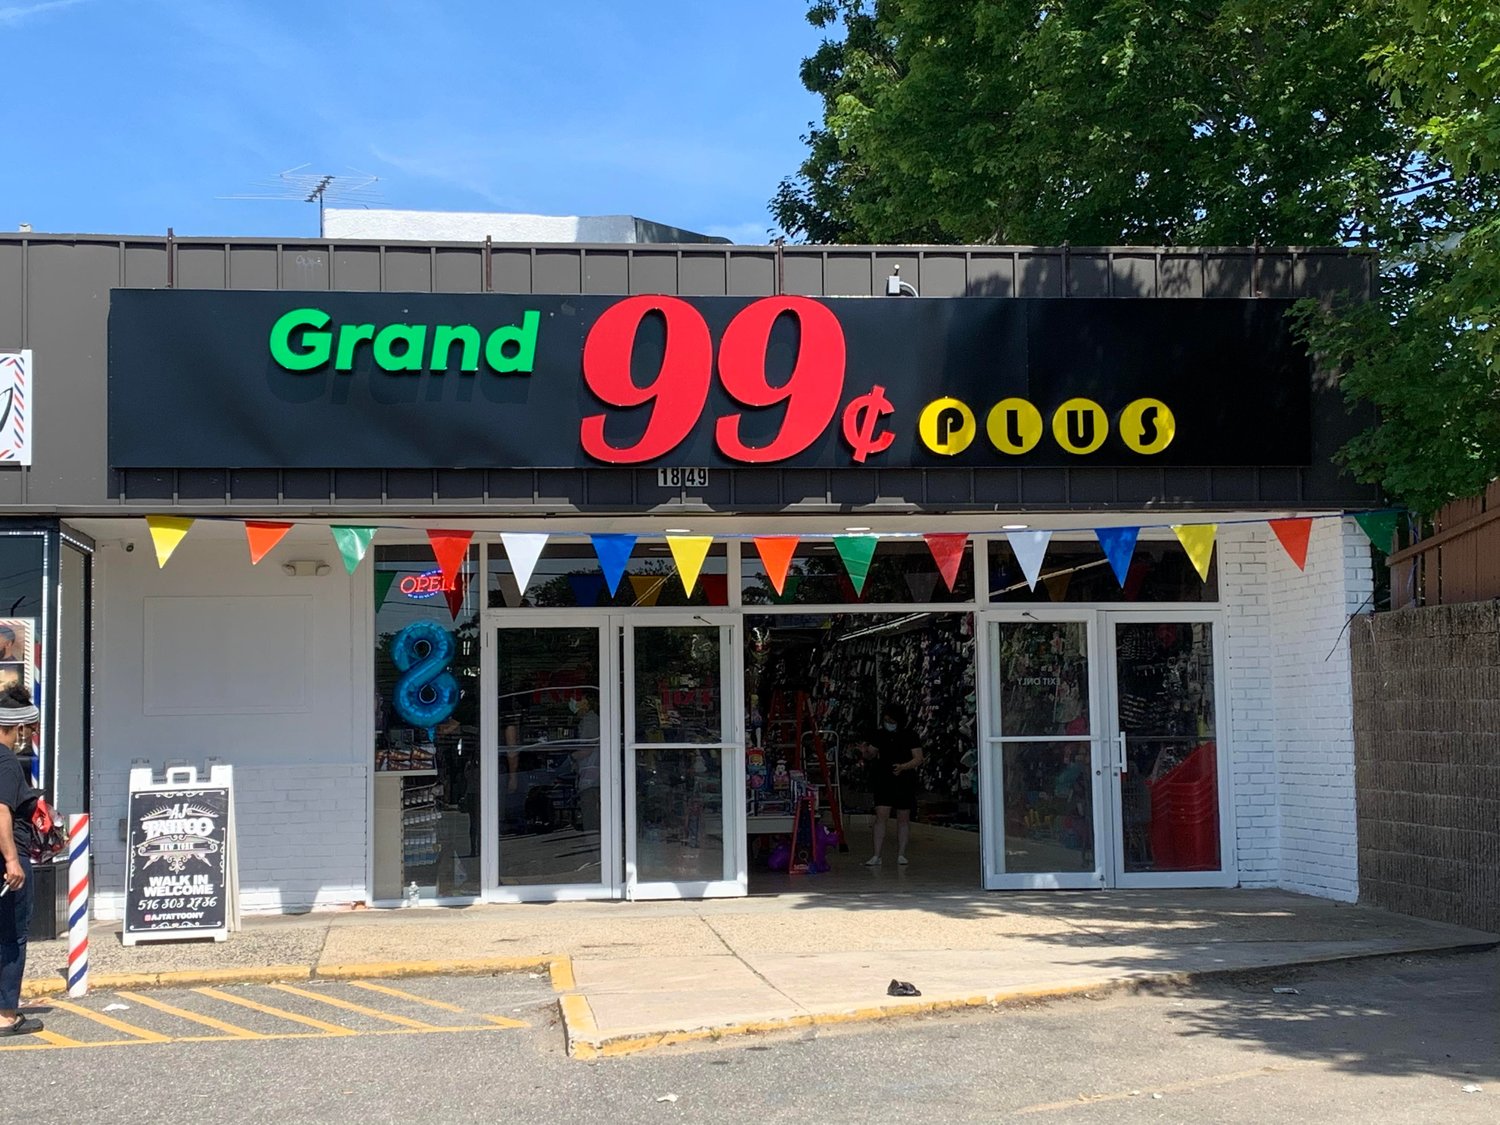 Grand 99¢ Plus is located at 1841 Grand Avenue, where Grand Avenue Cinema used to be.